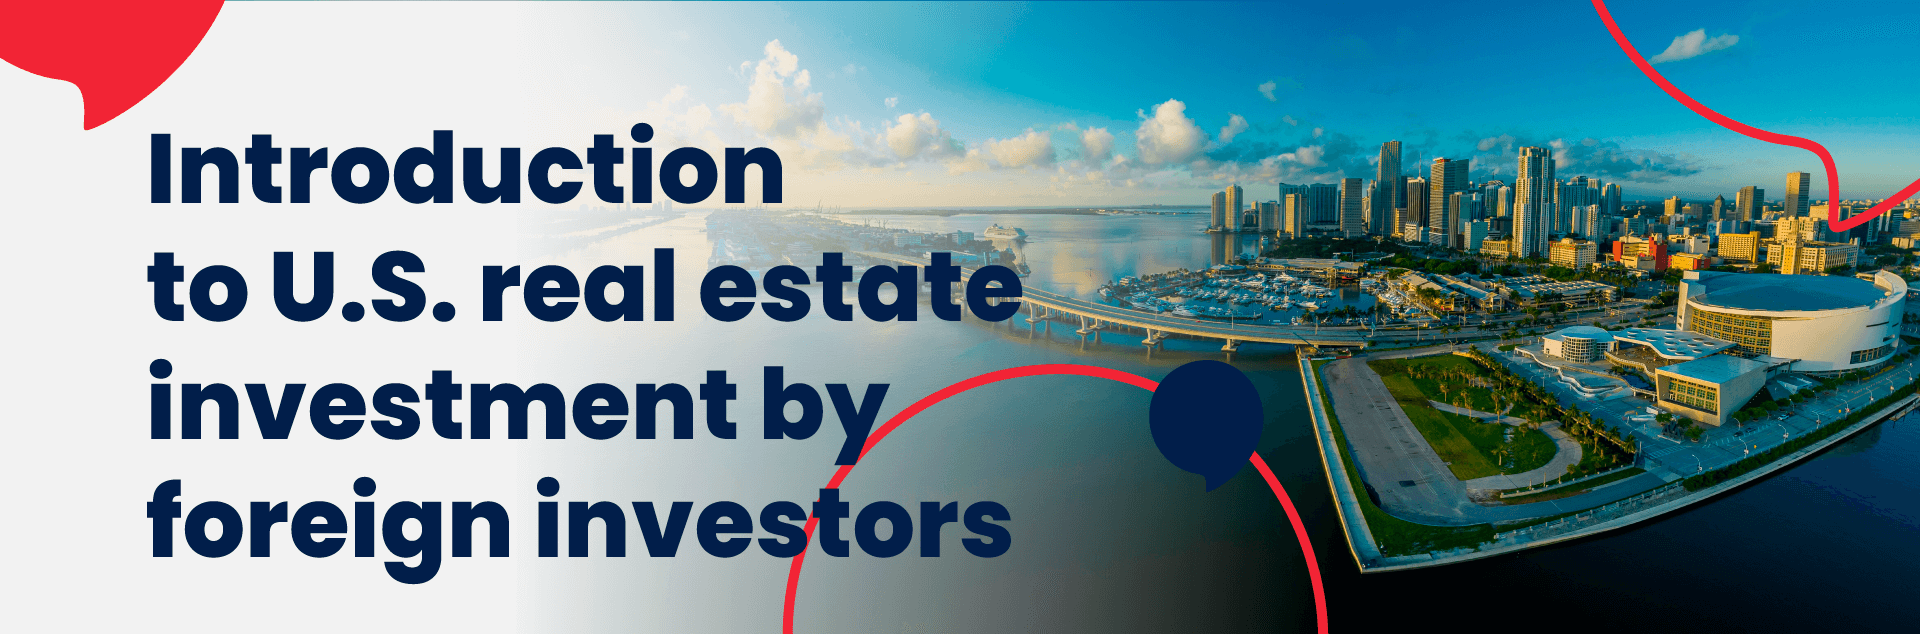 Introduction-to-U.S.-real-estate-investment-by-foreign-investors-1